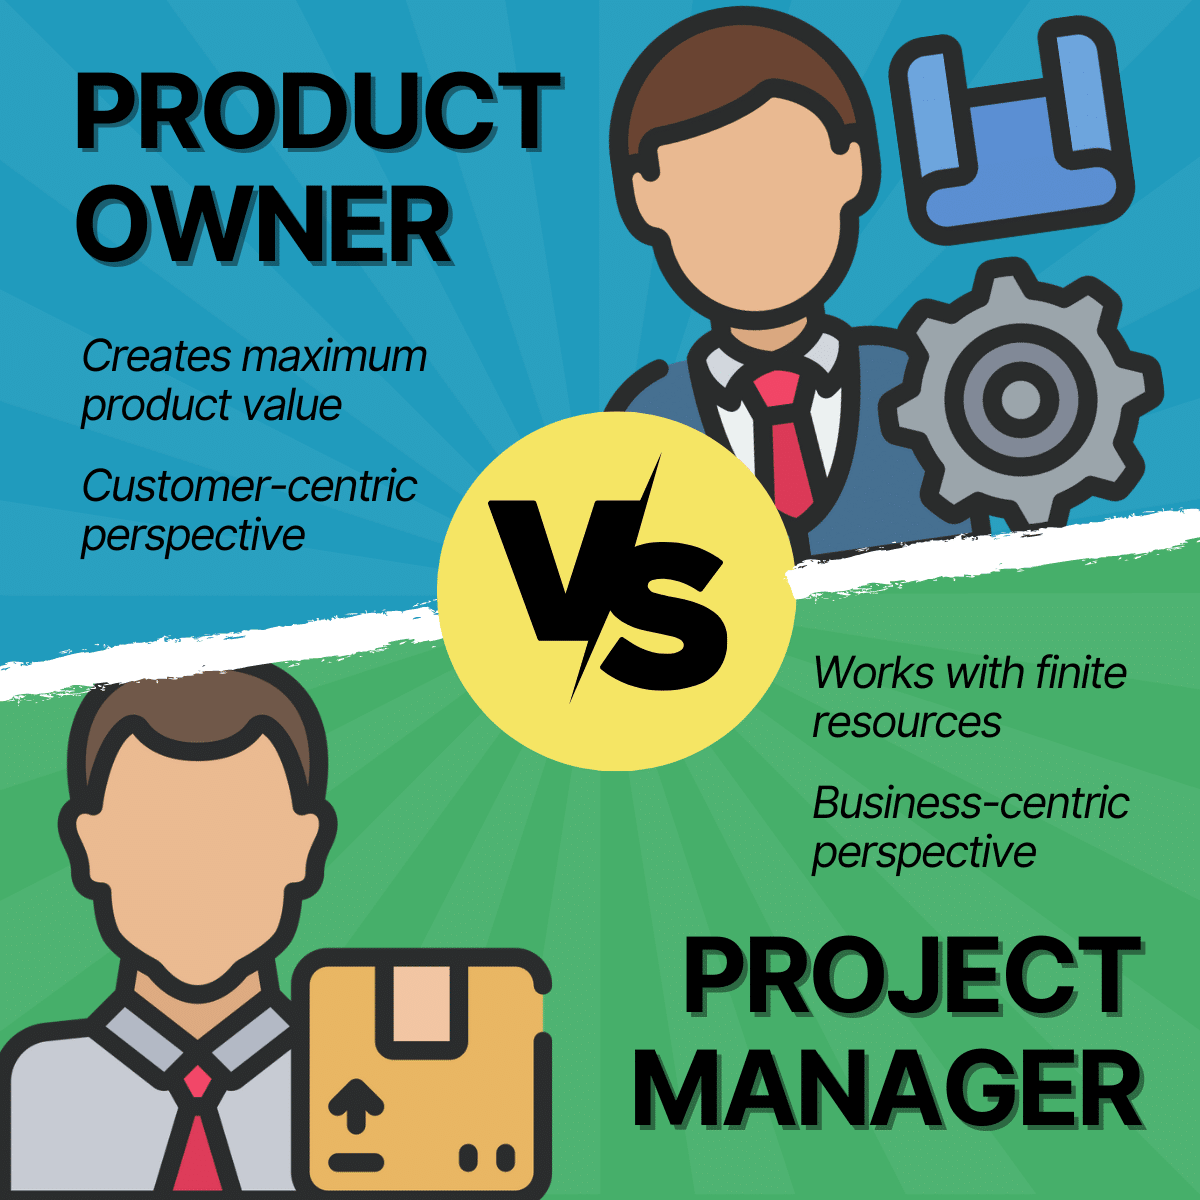 Product Owner vs Project Manager Focus and Perspective